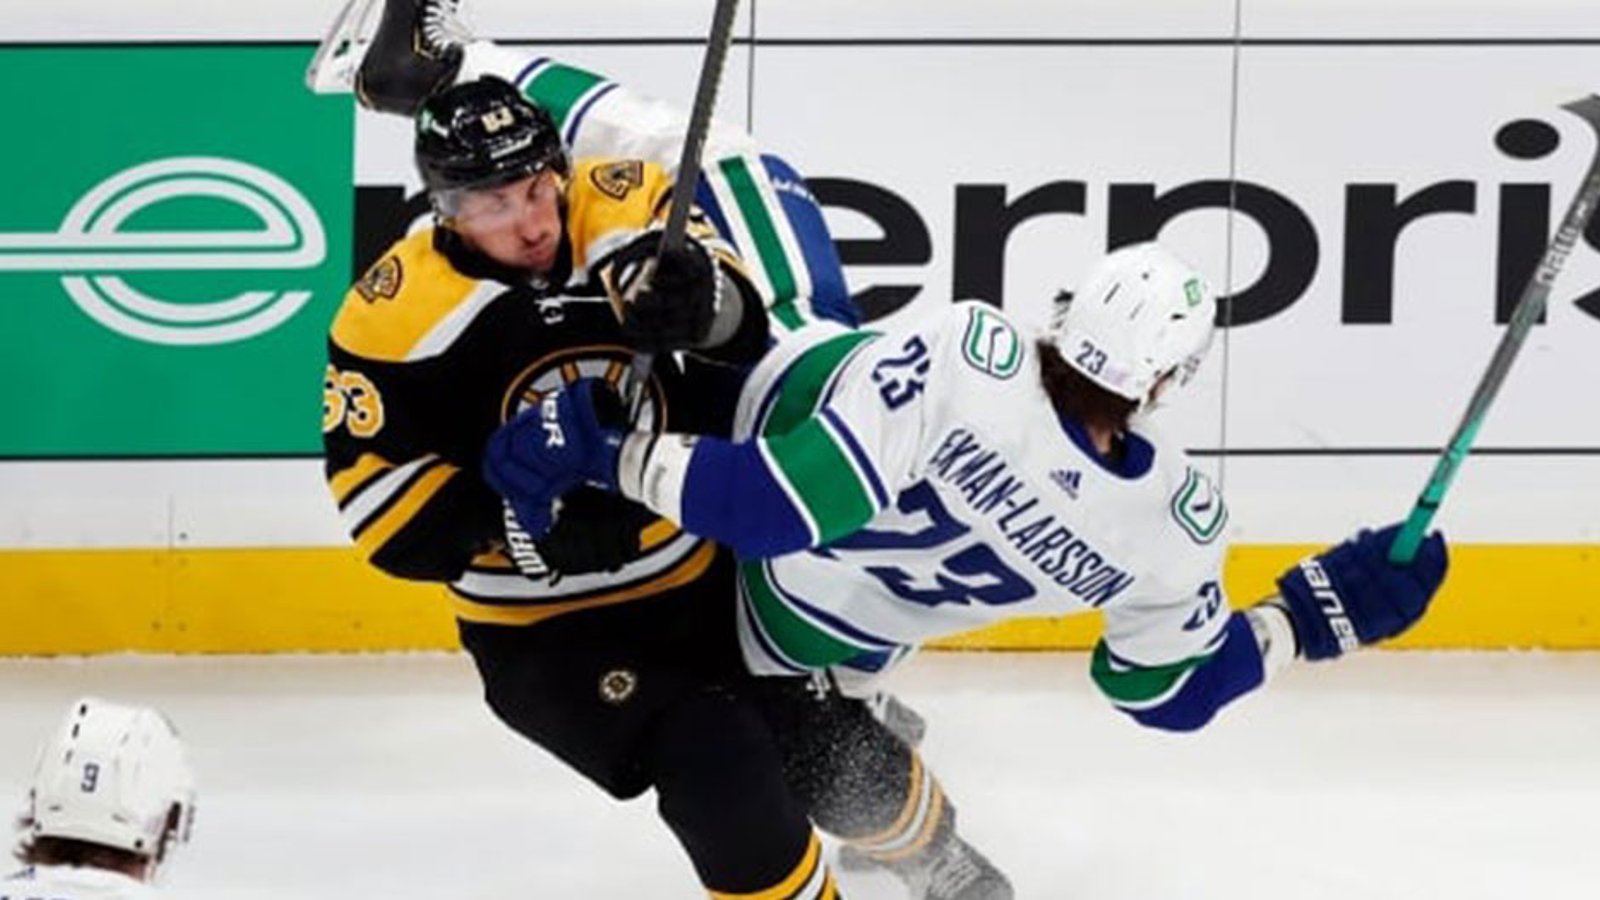 Marchand handed a whopping suspension for slew footing Oliver Ekman-Larsson